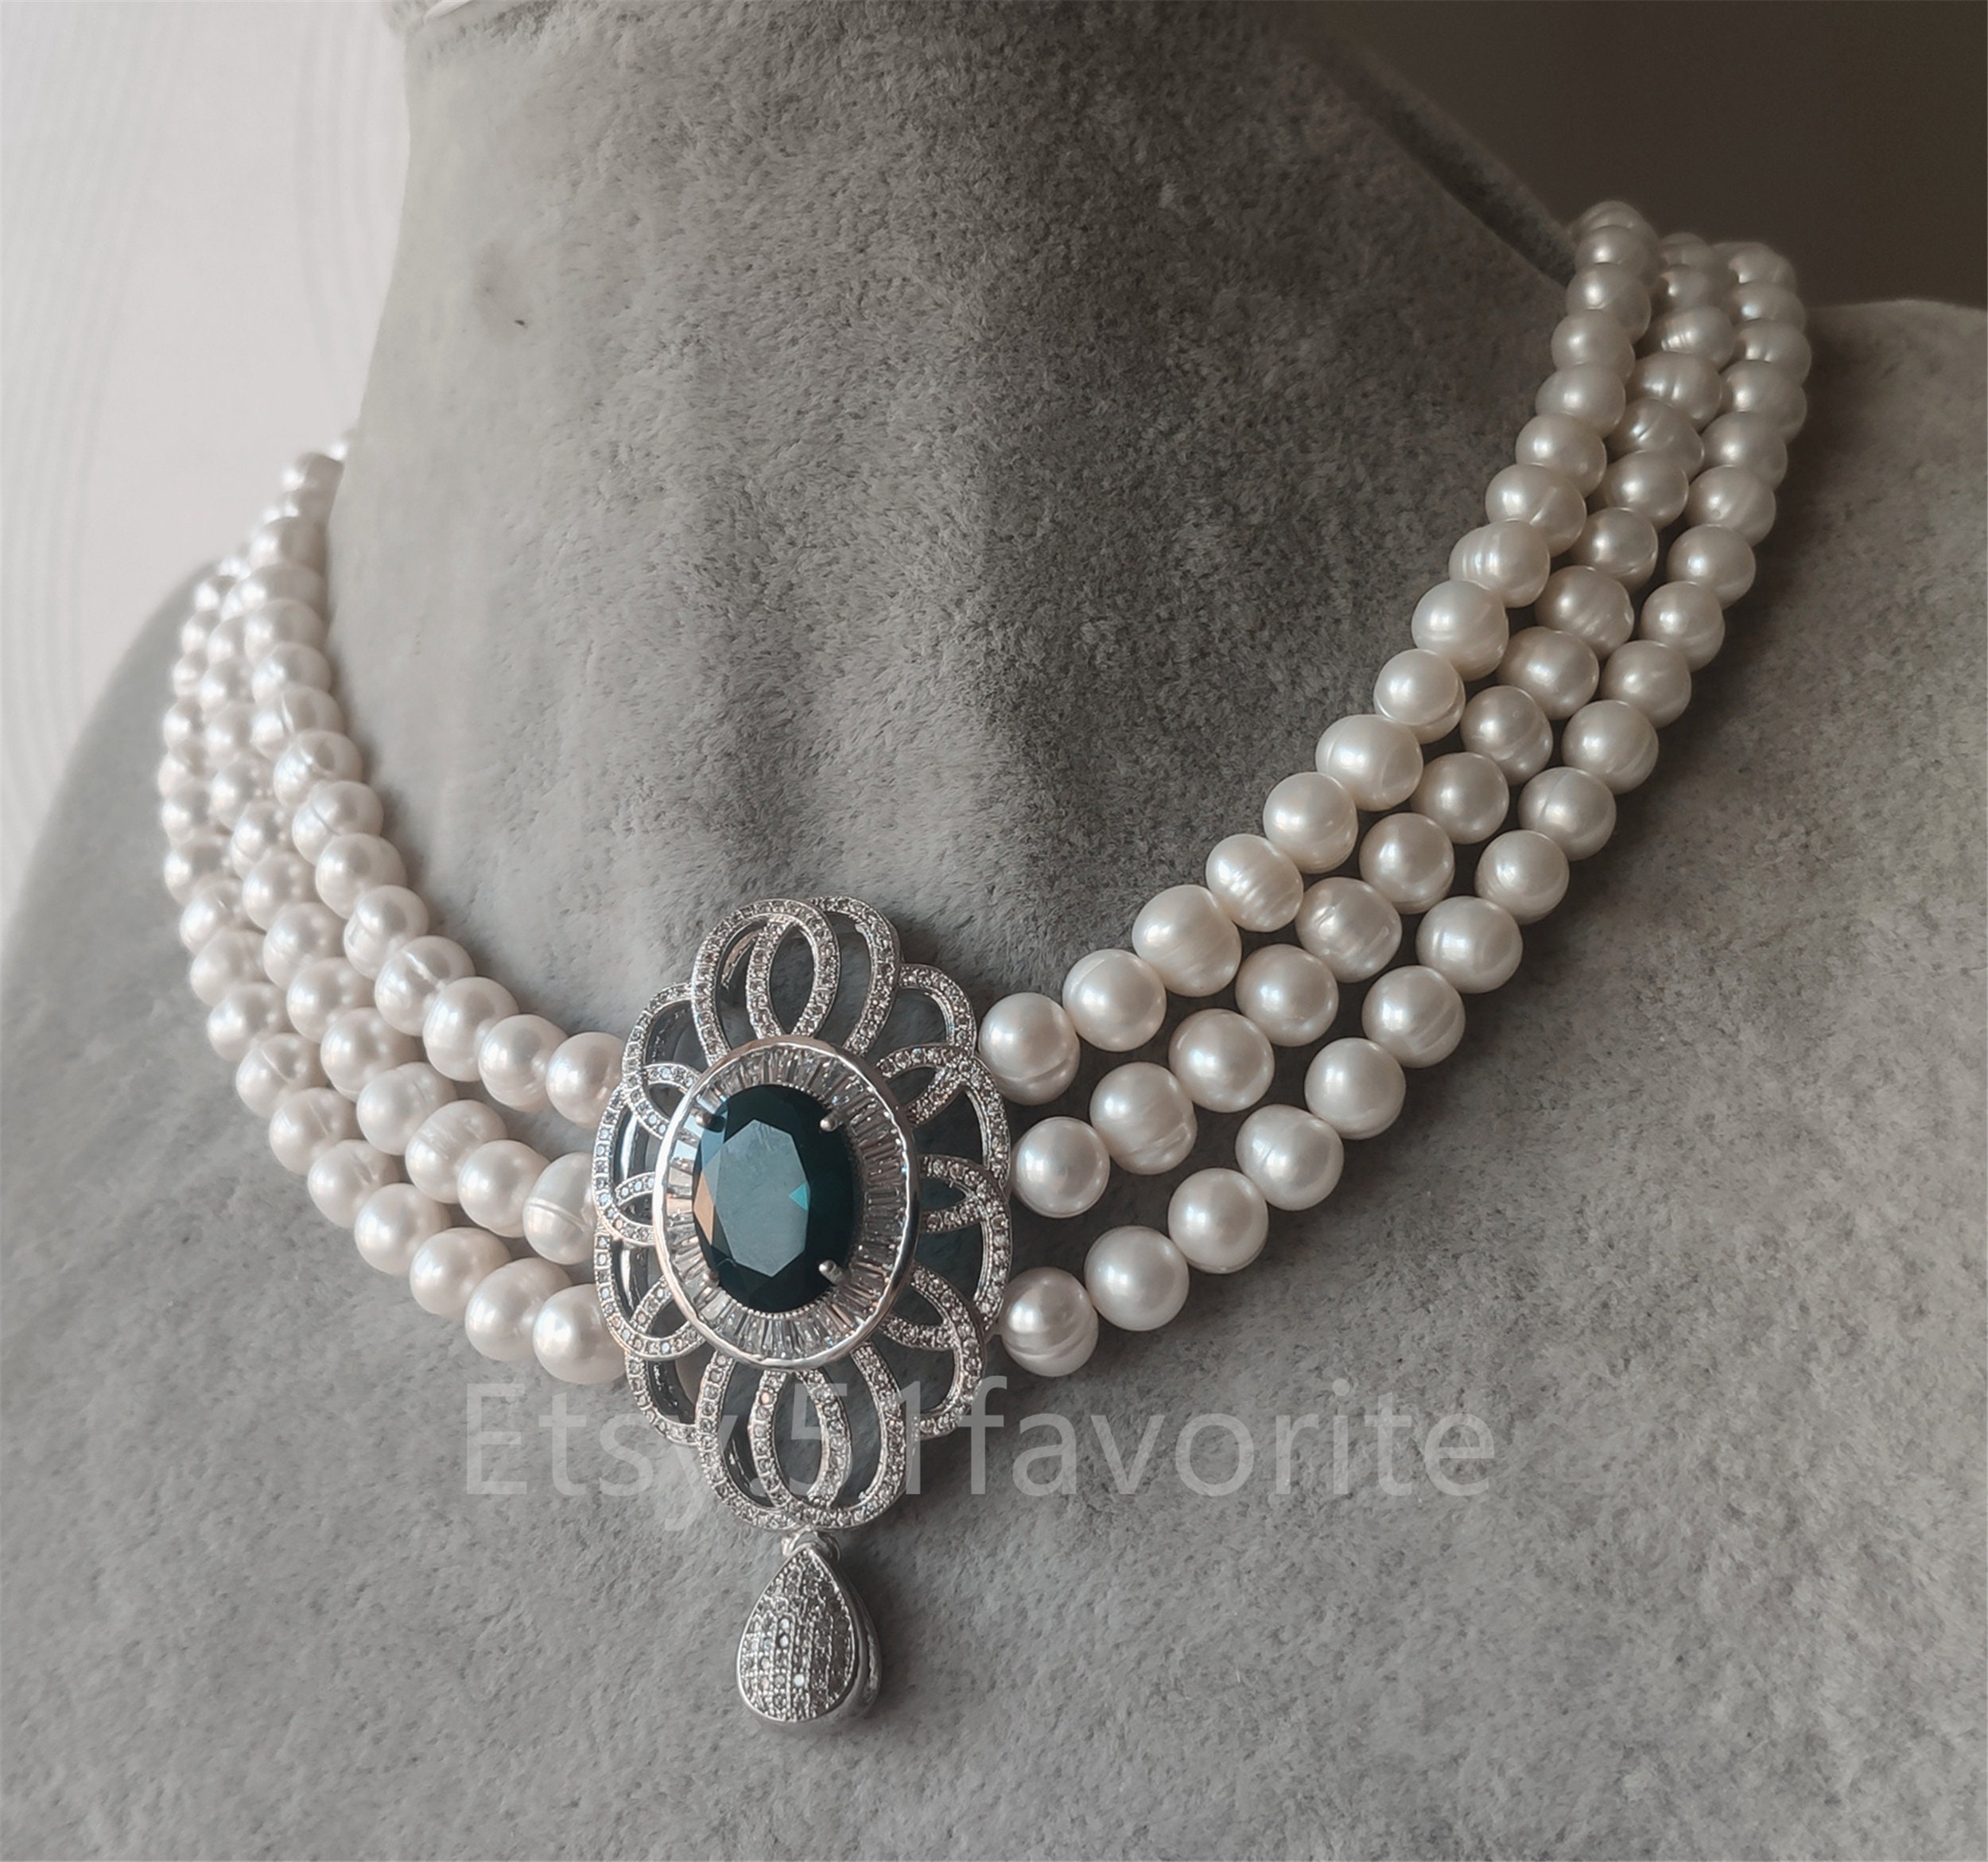 Illusion 30 Inch Pearl Necklace Multi Strand Bridesmaid Jewelry In  Freshwater White Color From Terisajewellery, $14.61